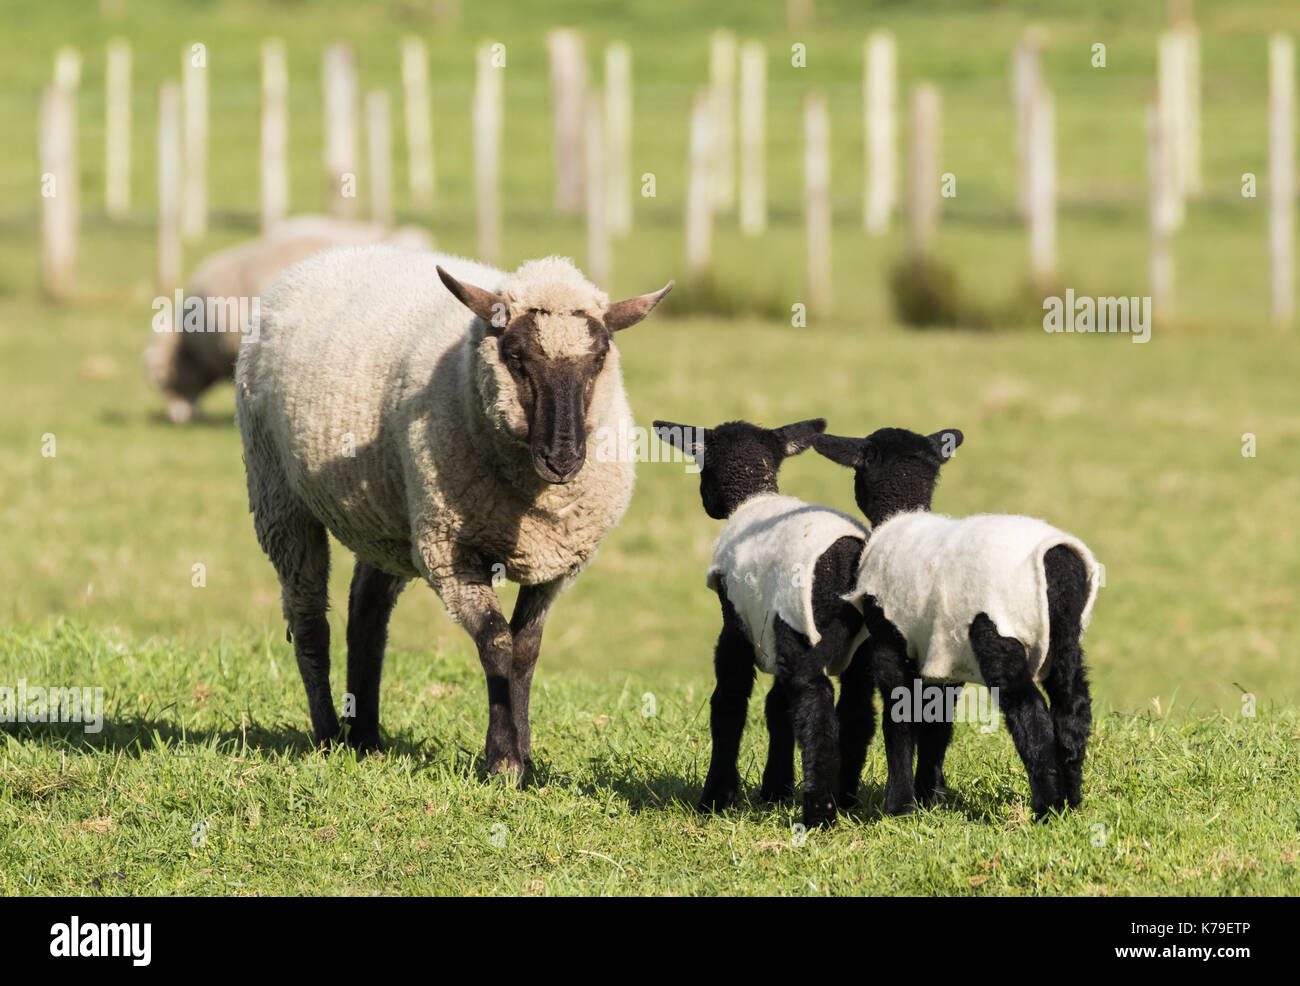 Black face New Zealand sheep Have a firm word to her black lambs. Stock Photo